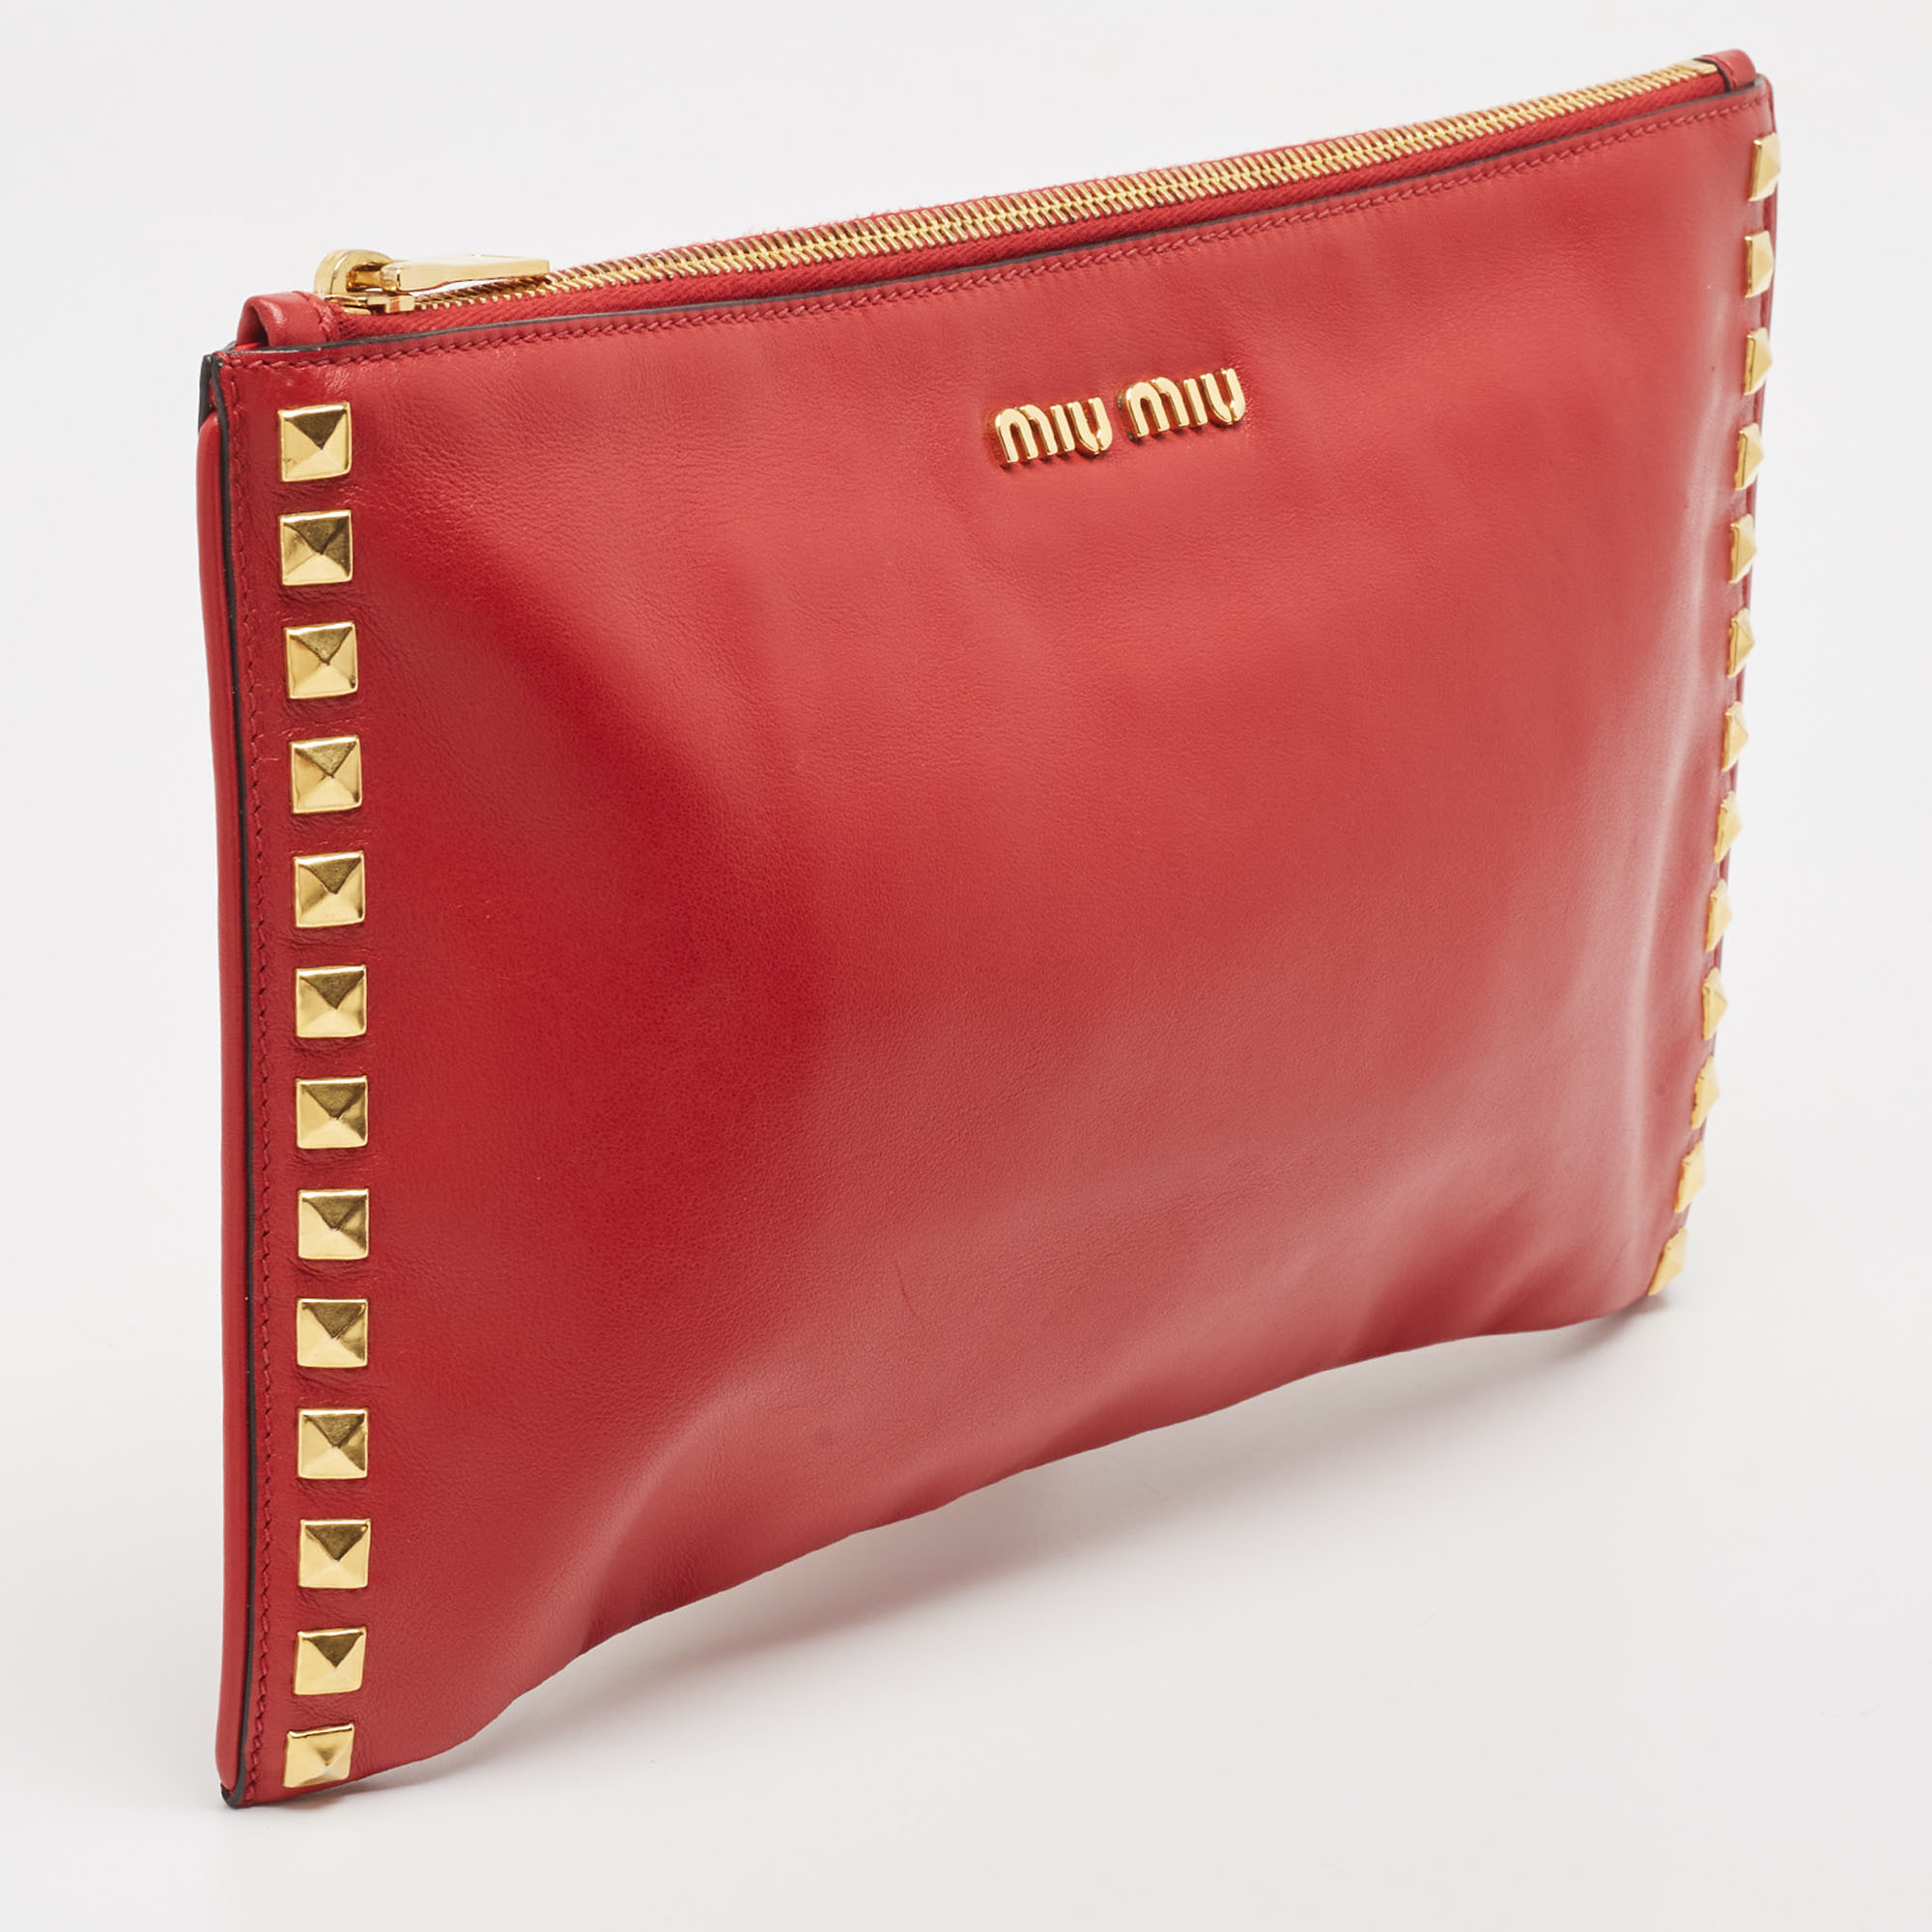 Miu Miu Red Leather Studded Zip Pouch